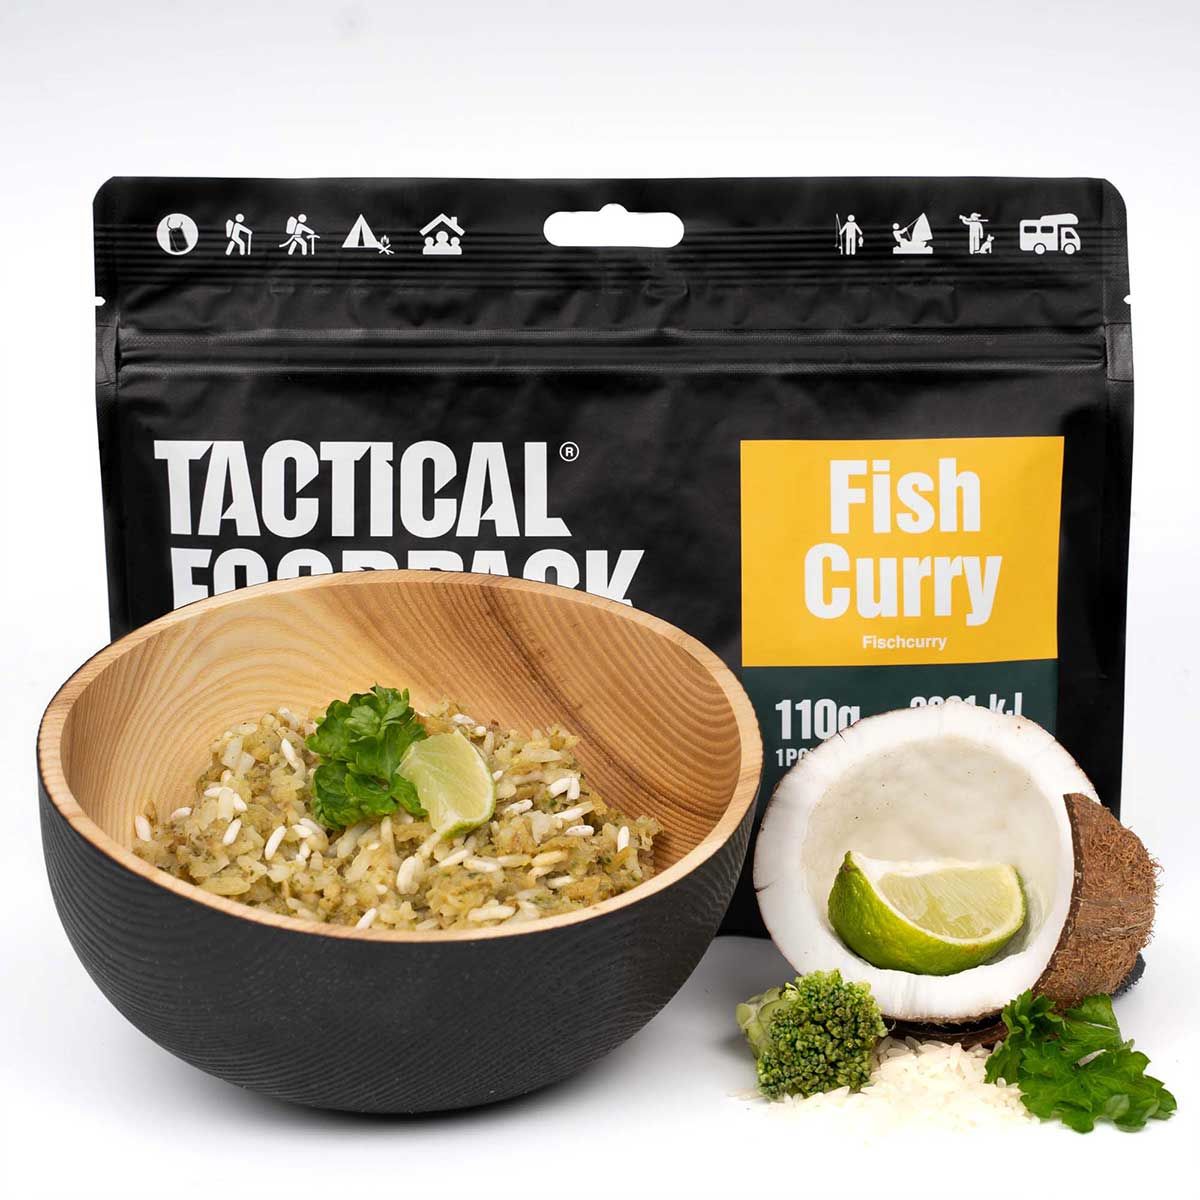 Poisson au curry tactical foodpack